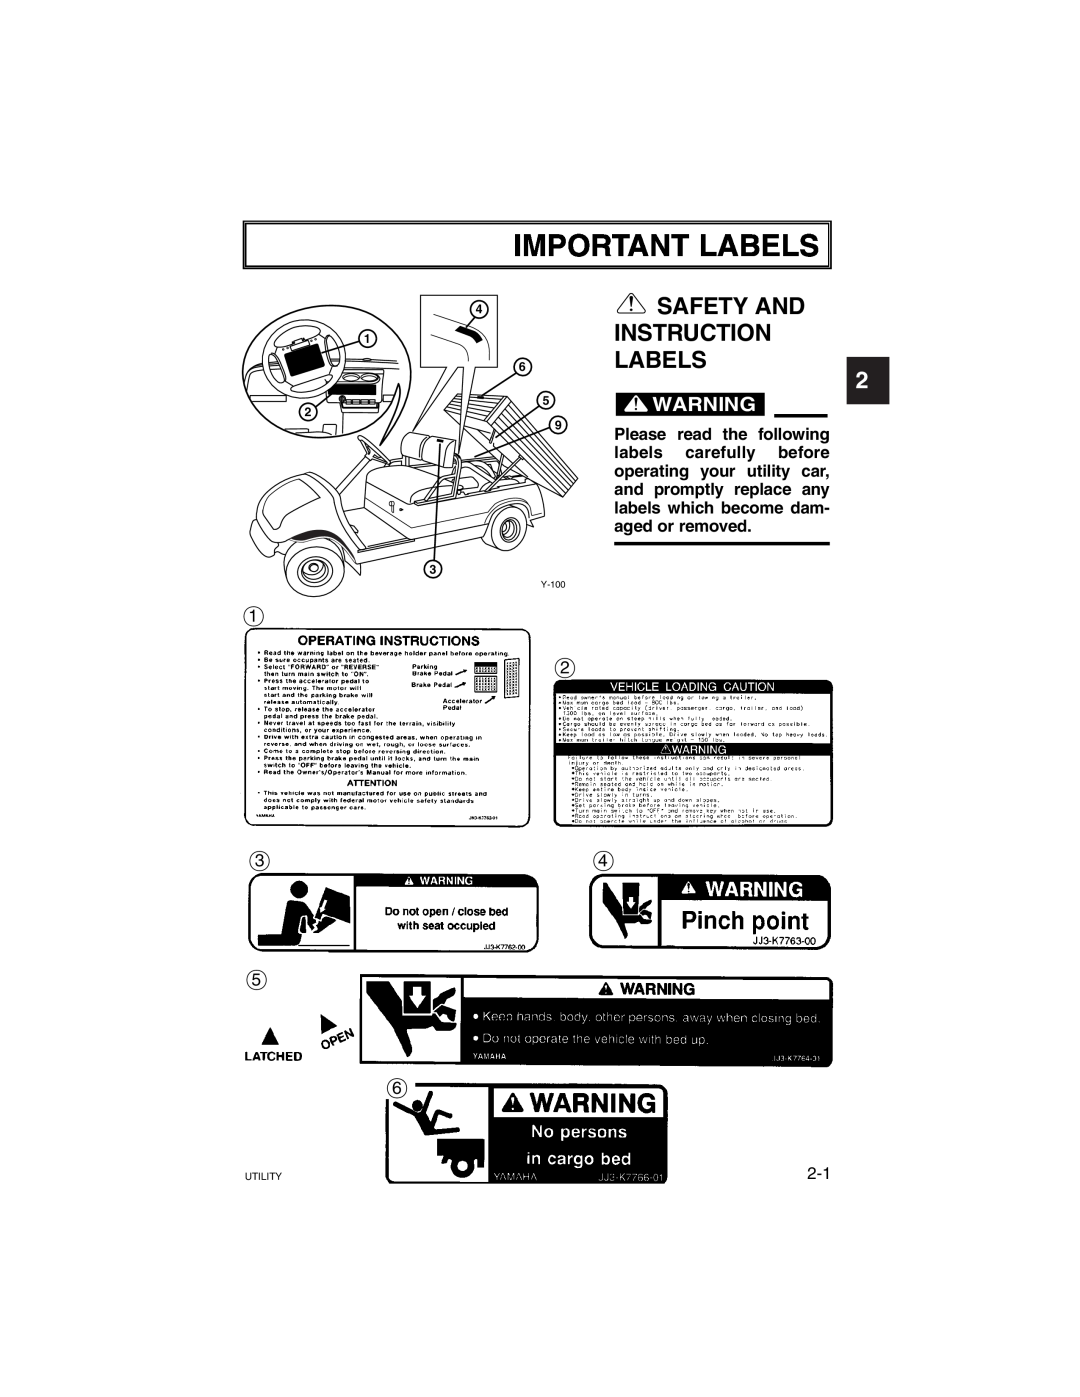 Yamaha G21A manual Important Labels, Safety And Instruction Labels 